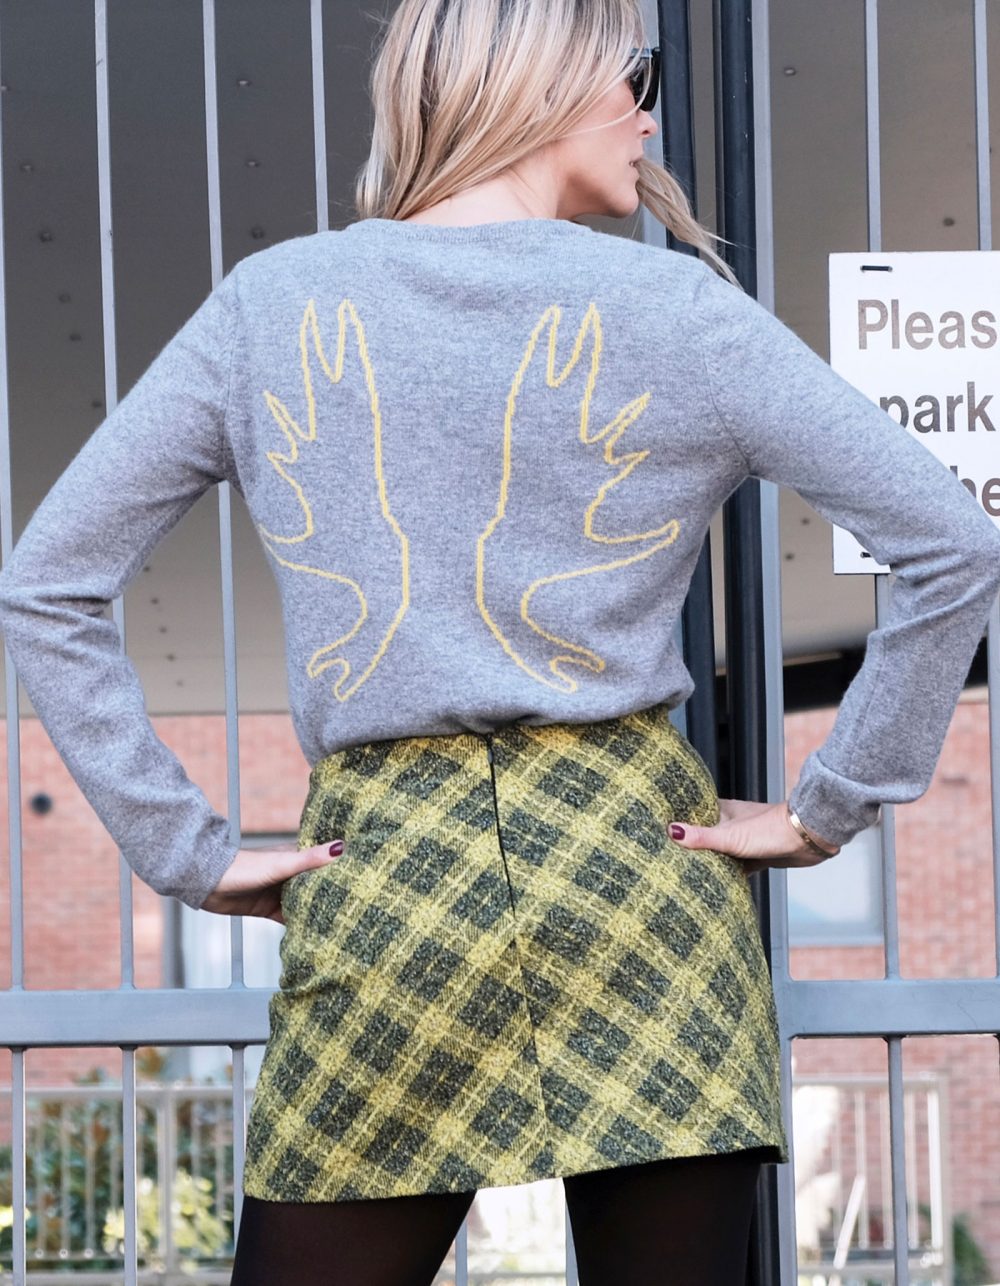 A woman wearing an Antlers cashmere Intarsia knit by Malin Darlin.